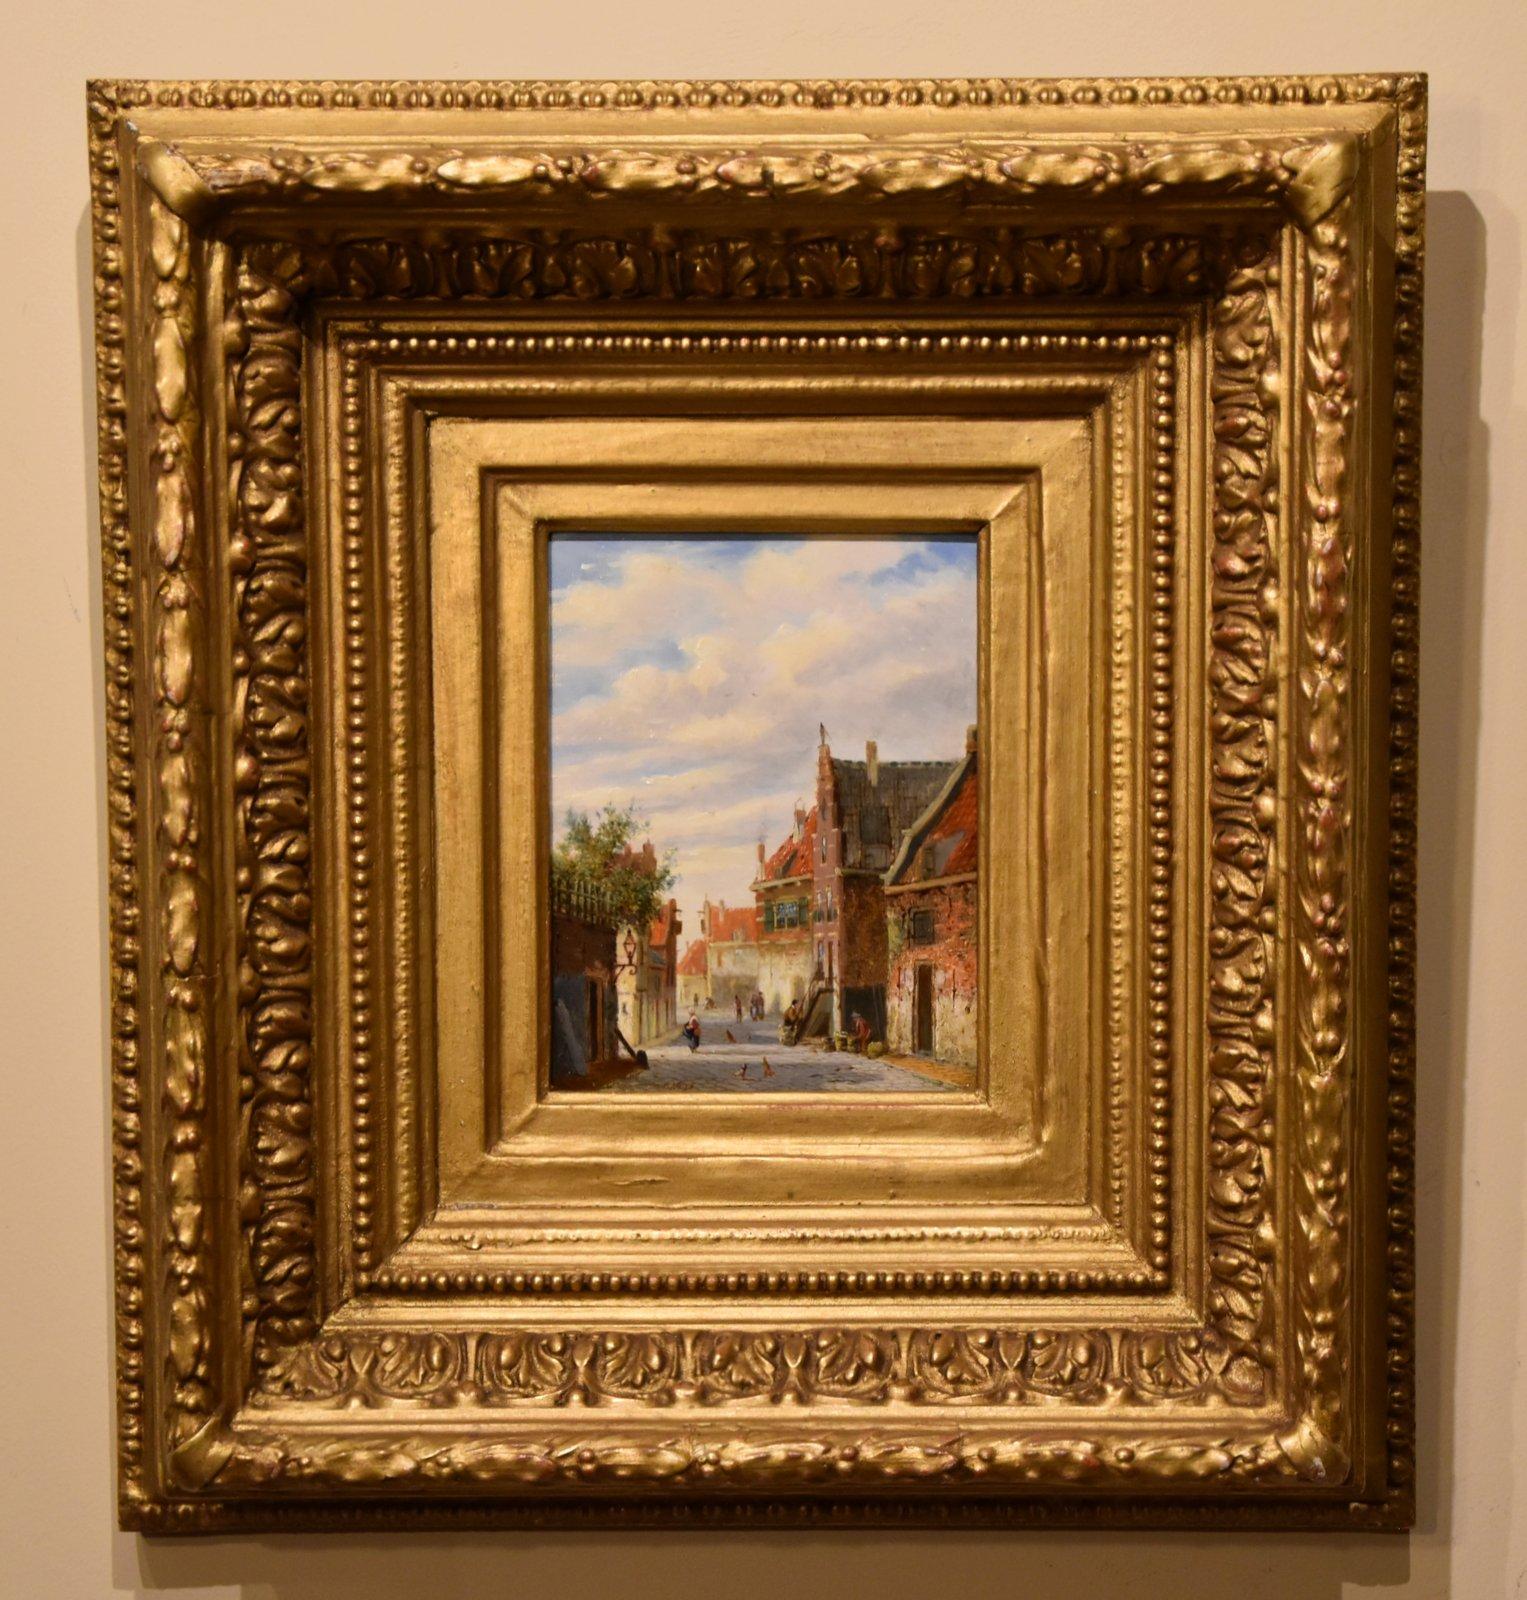 Oil Painting circle of Petrius Geradus Vertin "Dutch Townscene"  1819 - 1893. Very typical scene of Vertin or one of his followers. Fine quality town scene in a superb original frame. Oil on panel. 

Dimensions unframed  7.5  x  5.5
Dimensions